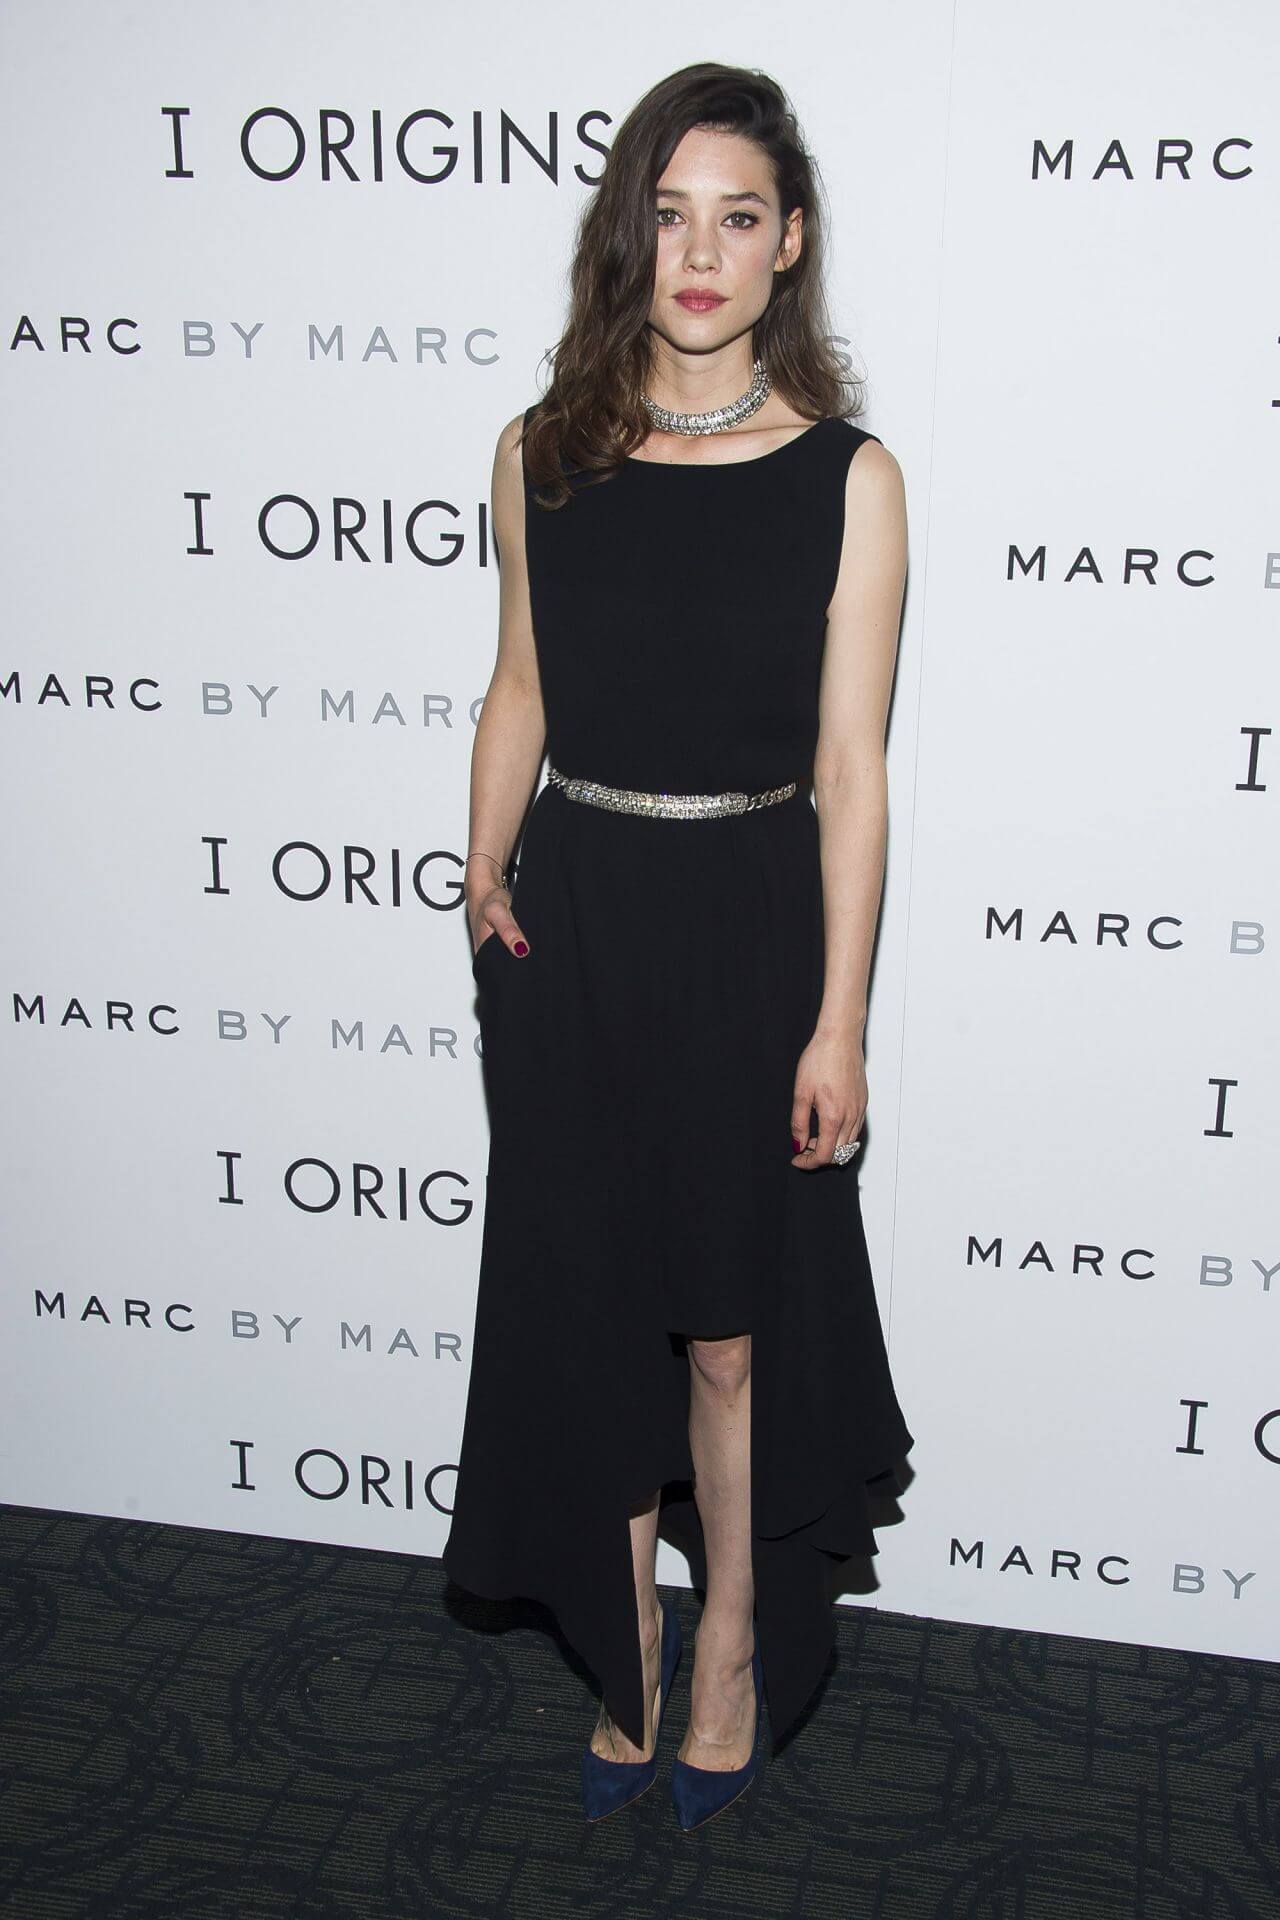 Astrid Berges-Frisbey  In Black Sleeveless Ruffle Gown With Oxidised Waist Belt At ‘I Origins’ Premiere in New York City